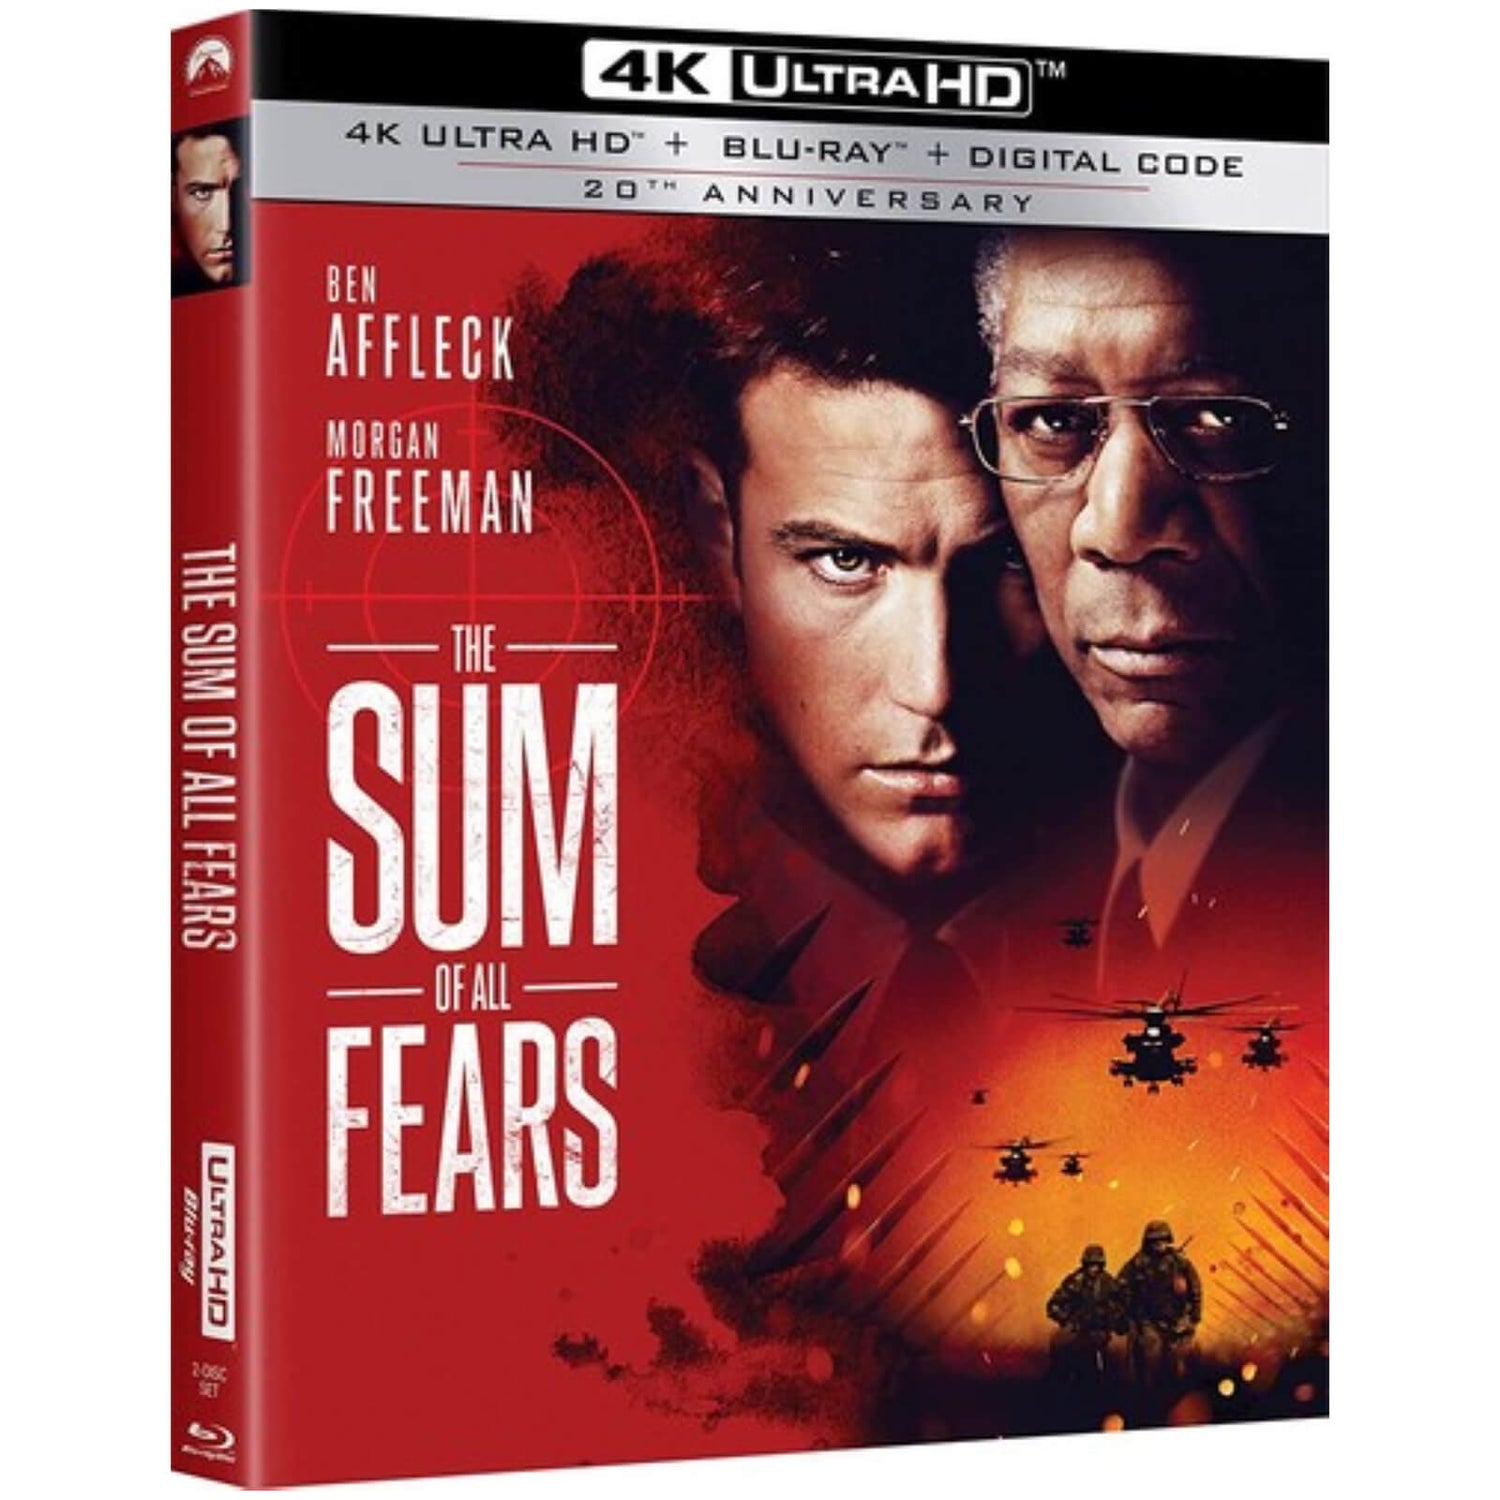 The Sum of All Fears: 20th Anniversary - 4K Ultra HD (Includes Blu-ray)